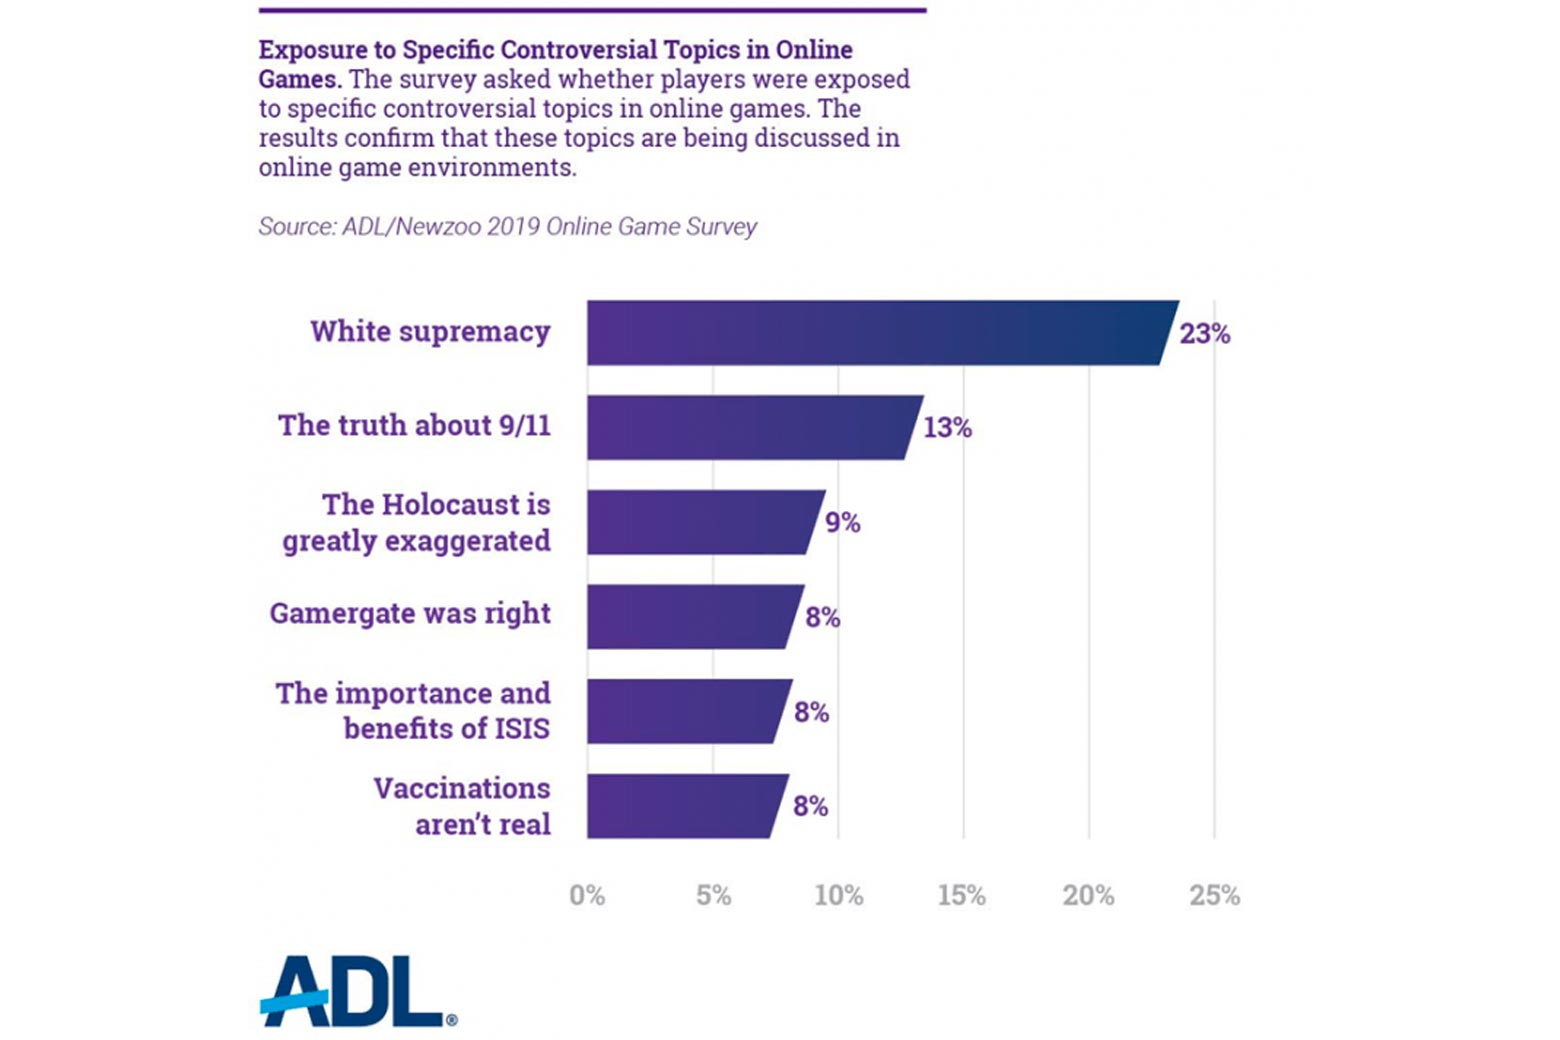 The results of a survey asking about "Exposure to Specific Controversial Topics in Online Games" 